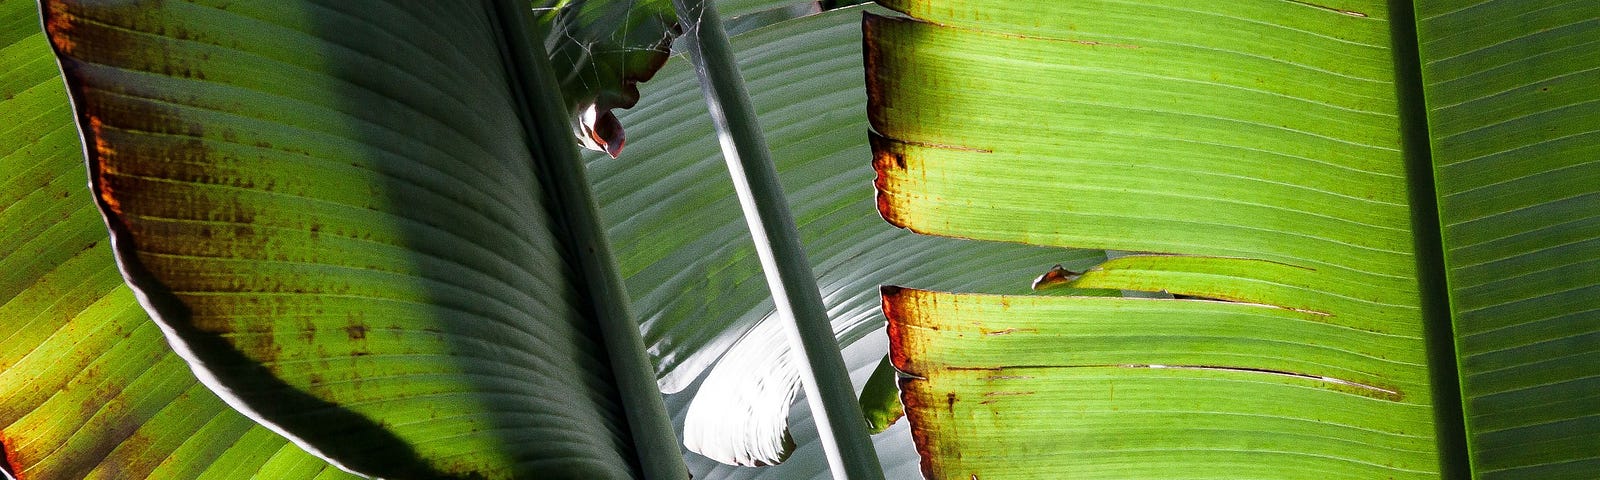 close up of banana leaves, large flat heavy leaves.